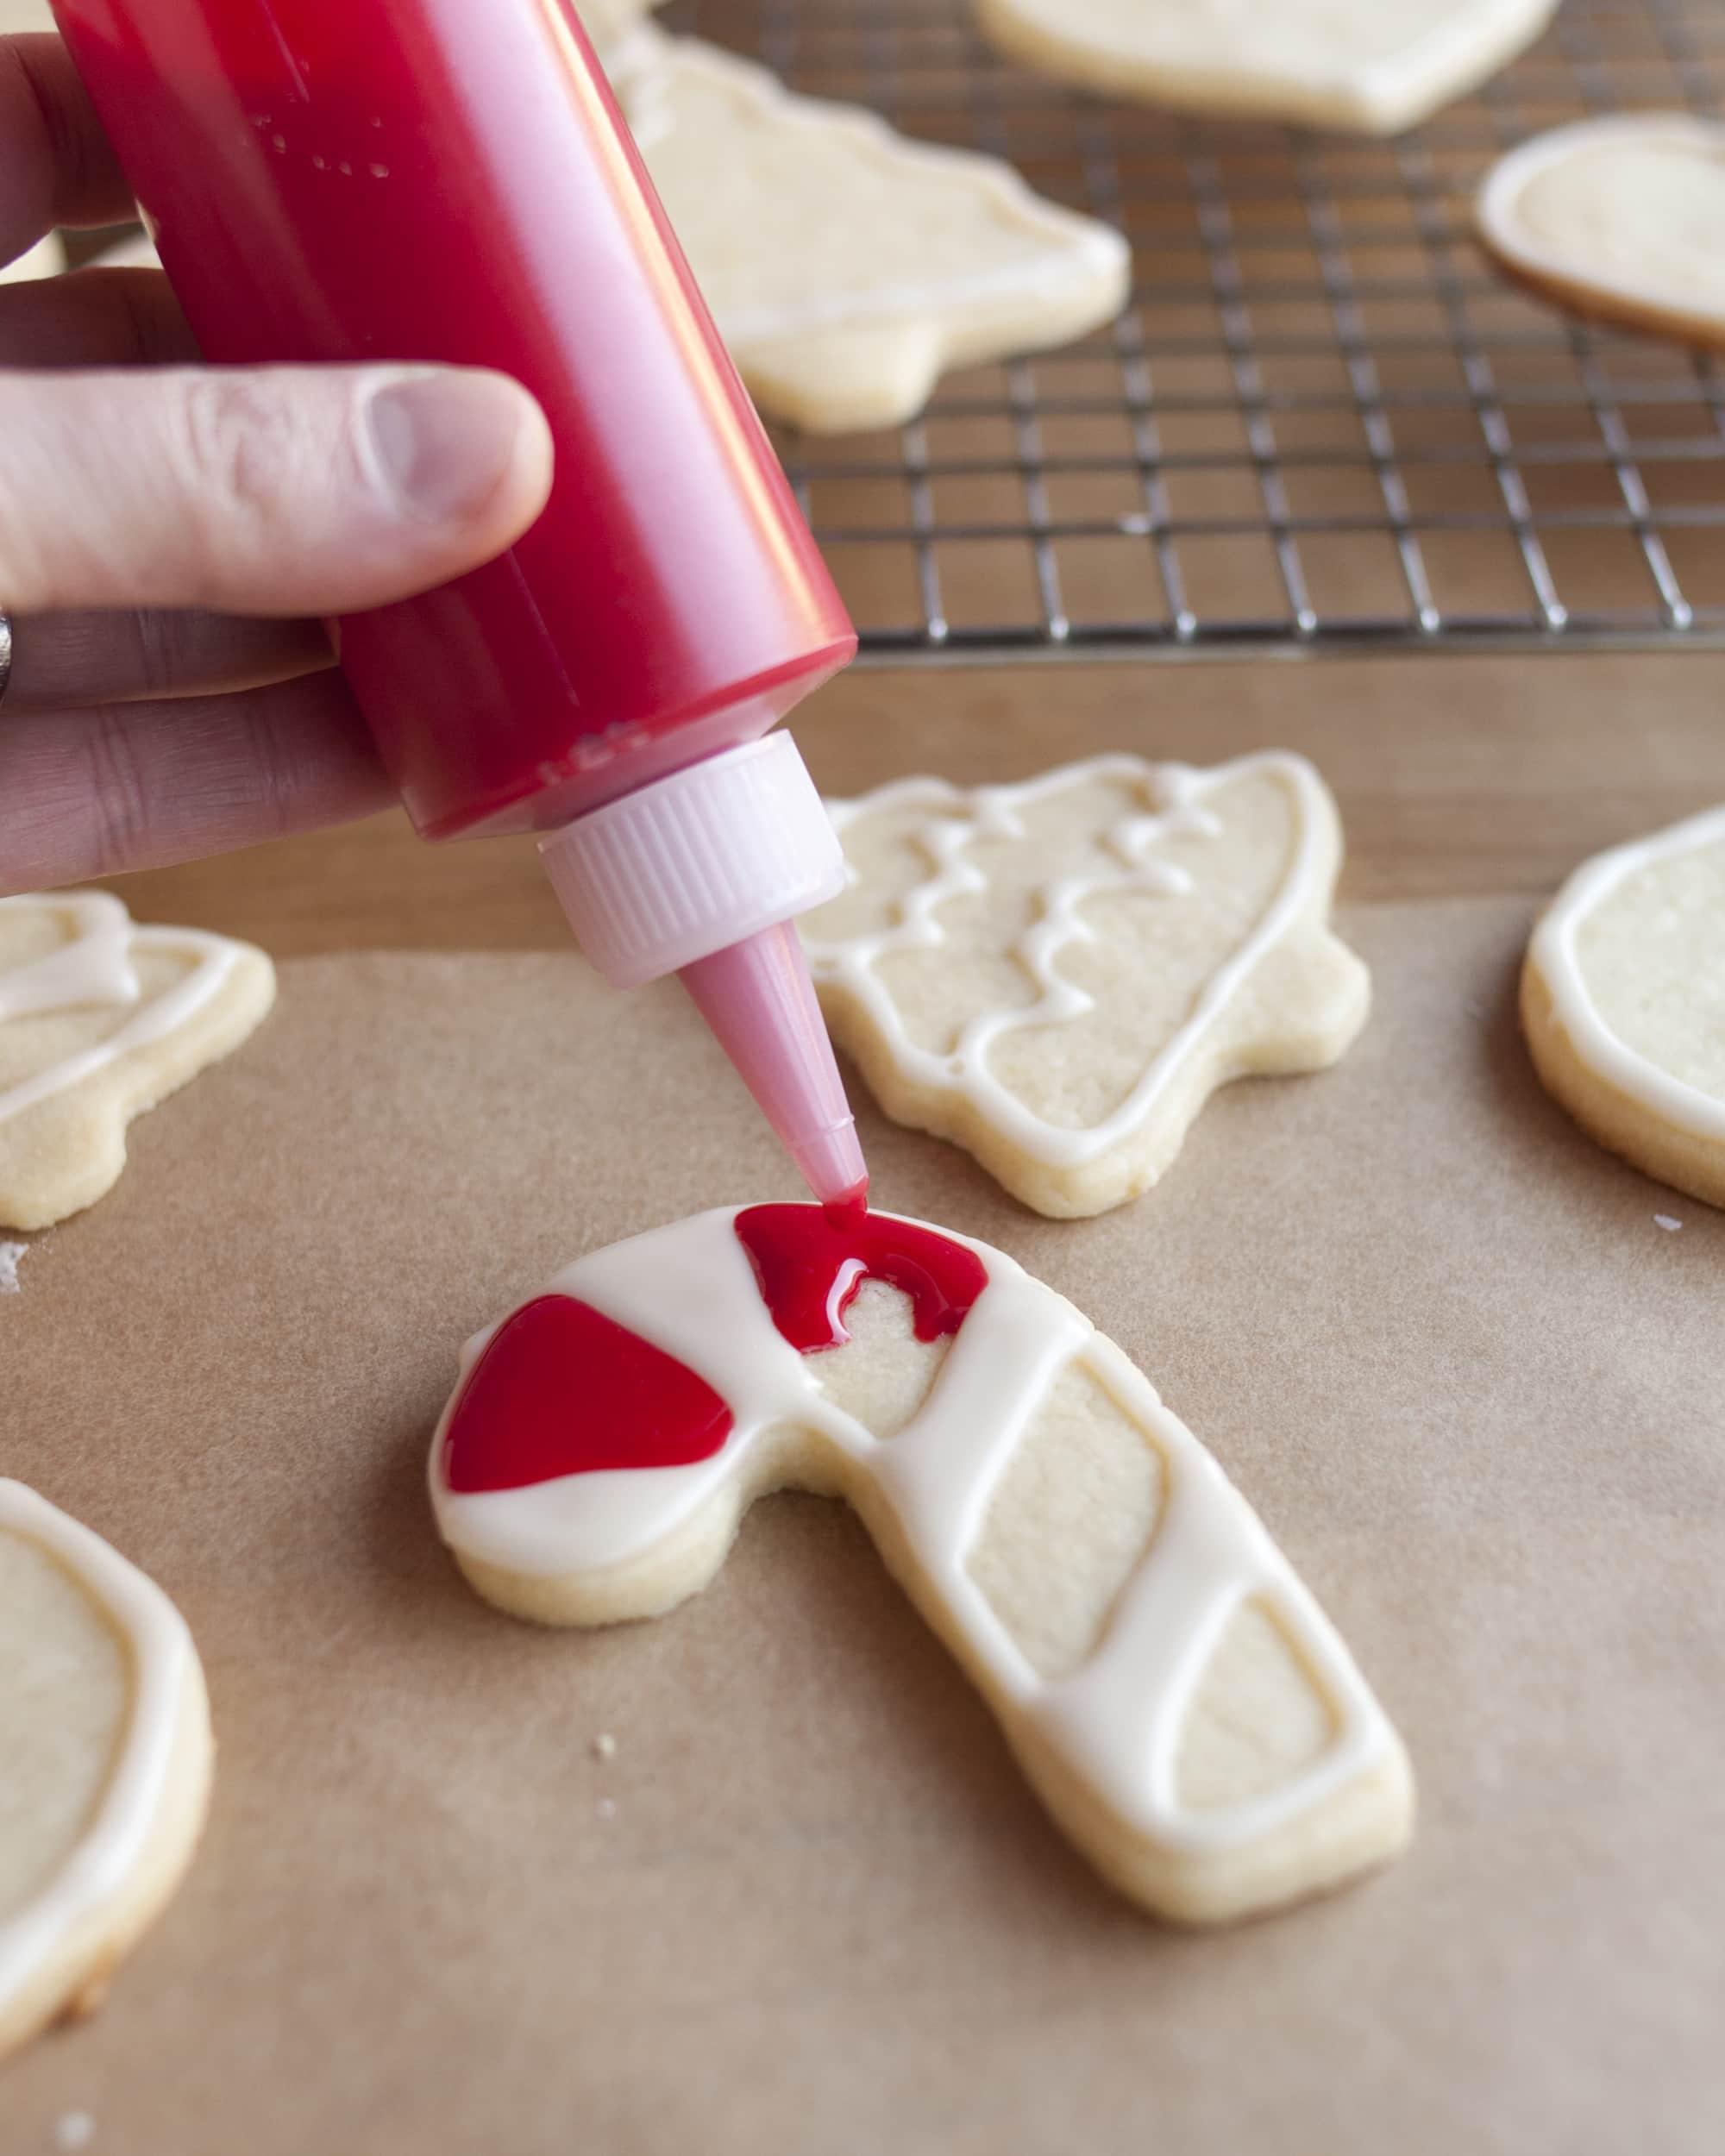 How To Decorate Cookies with 2-Ingredient Easy Icing | Kitchn